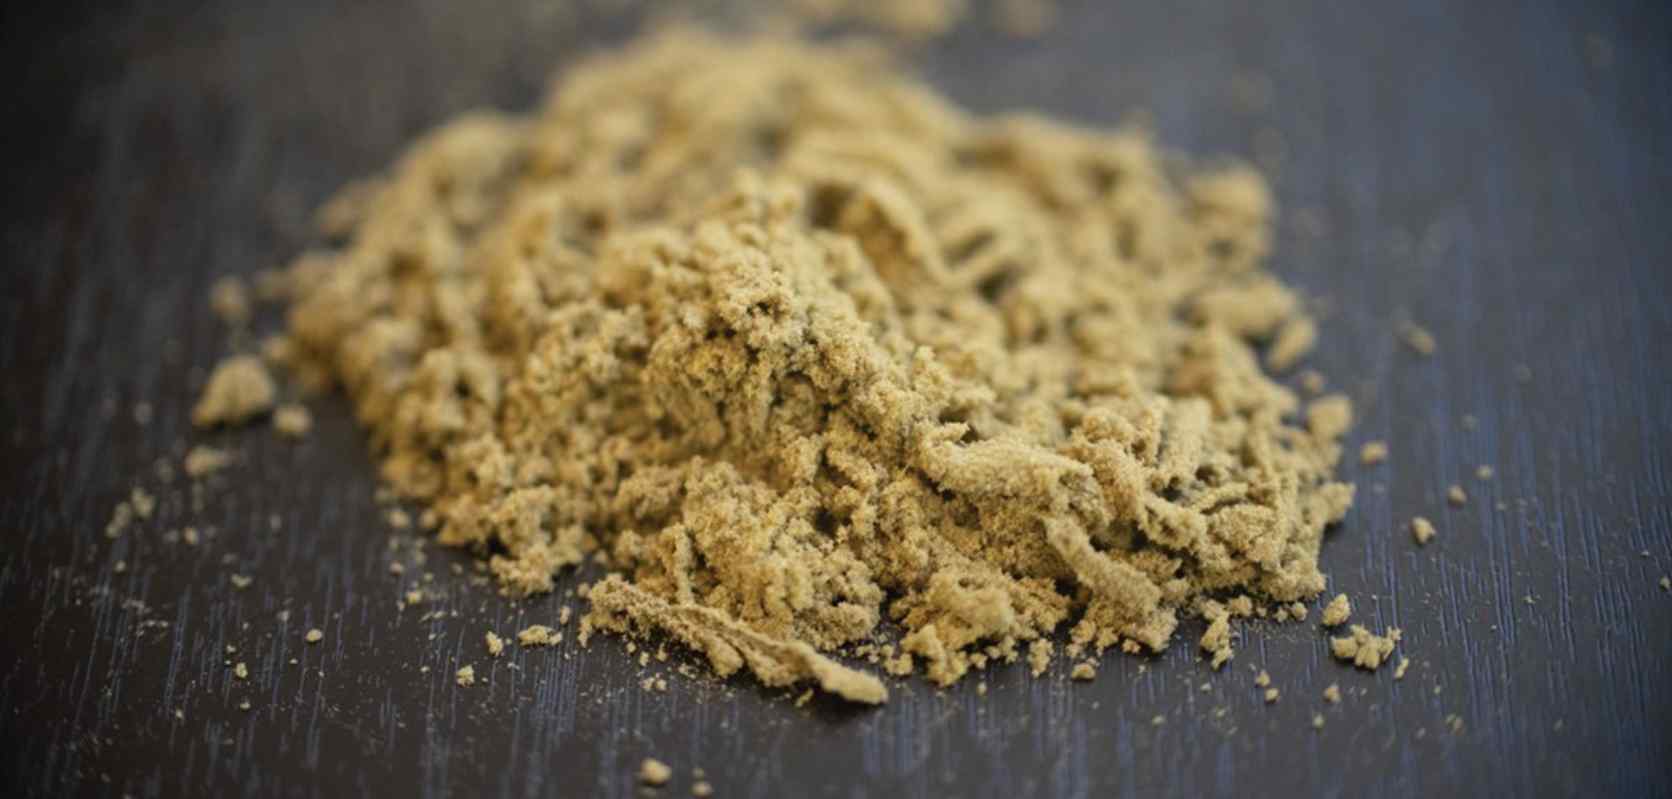 Bubble hash is made using ice water and bubbles when smoked. There's not much difference between dry ice hashish and bubble hash.